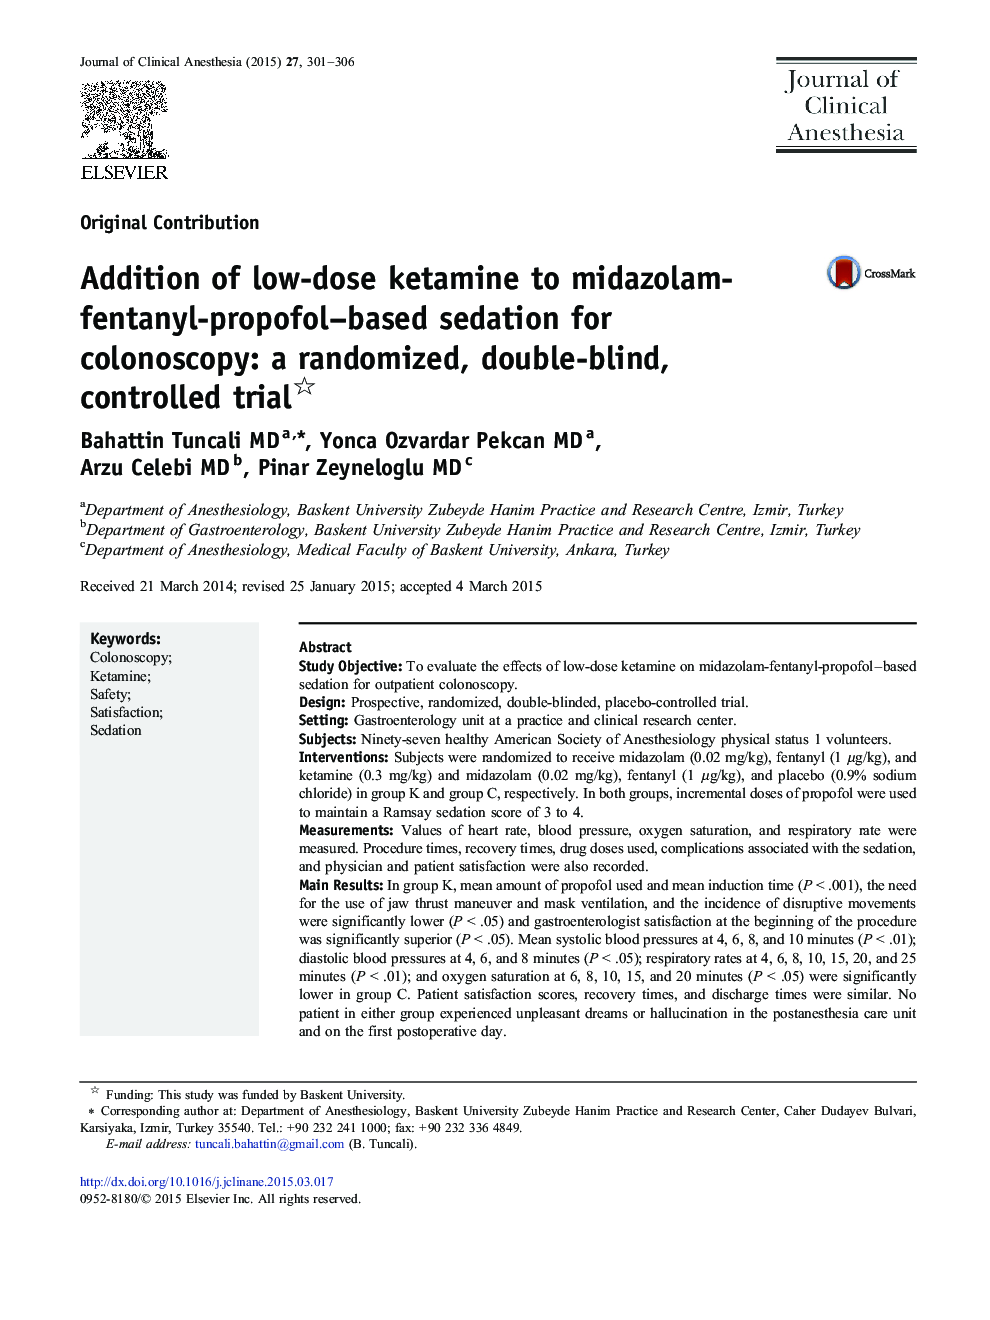 Addition of low-dose ketamine to midazolam-fentanyl-propofol–based sedation for colonoscopy: a randomized, double-blind, controlled trial 